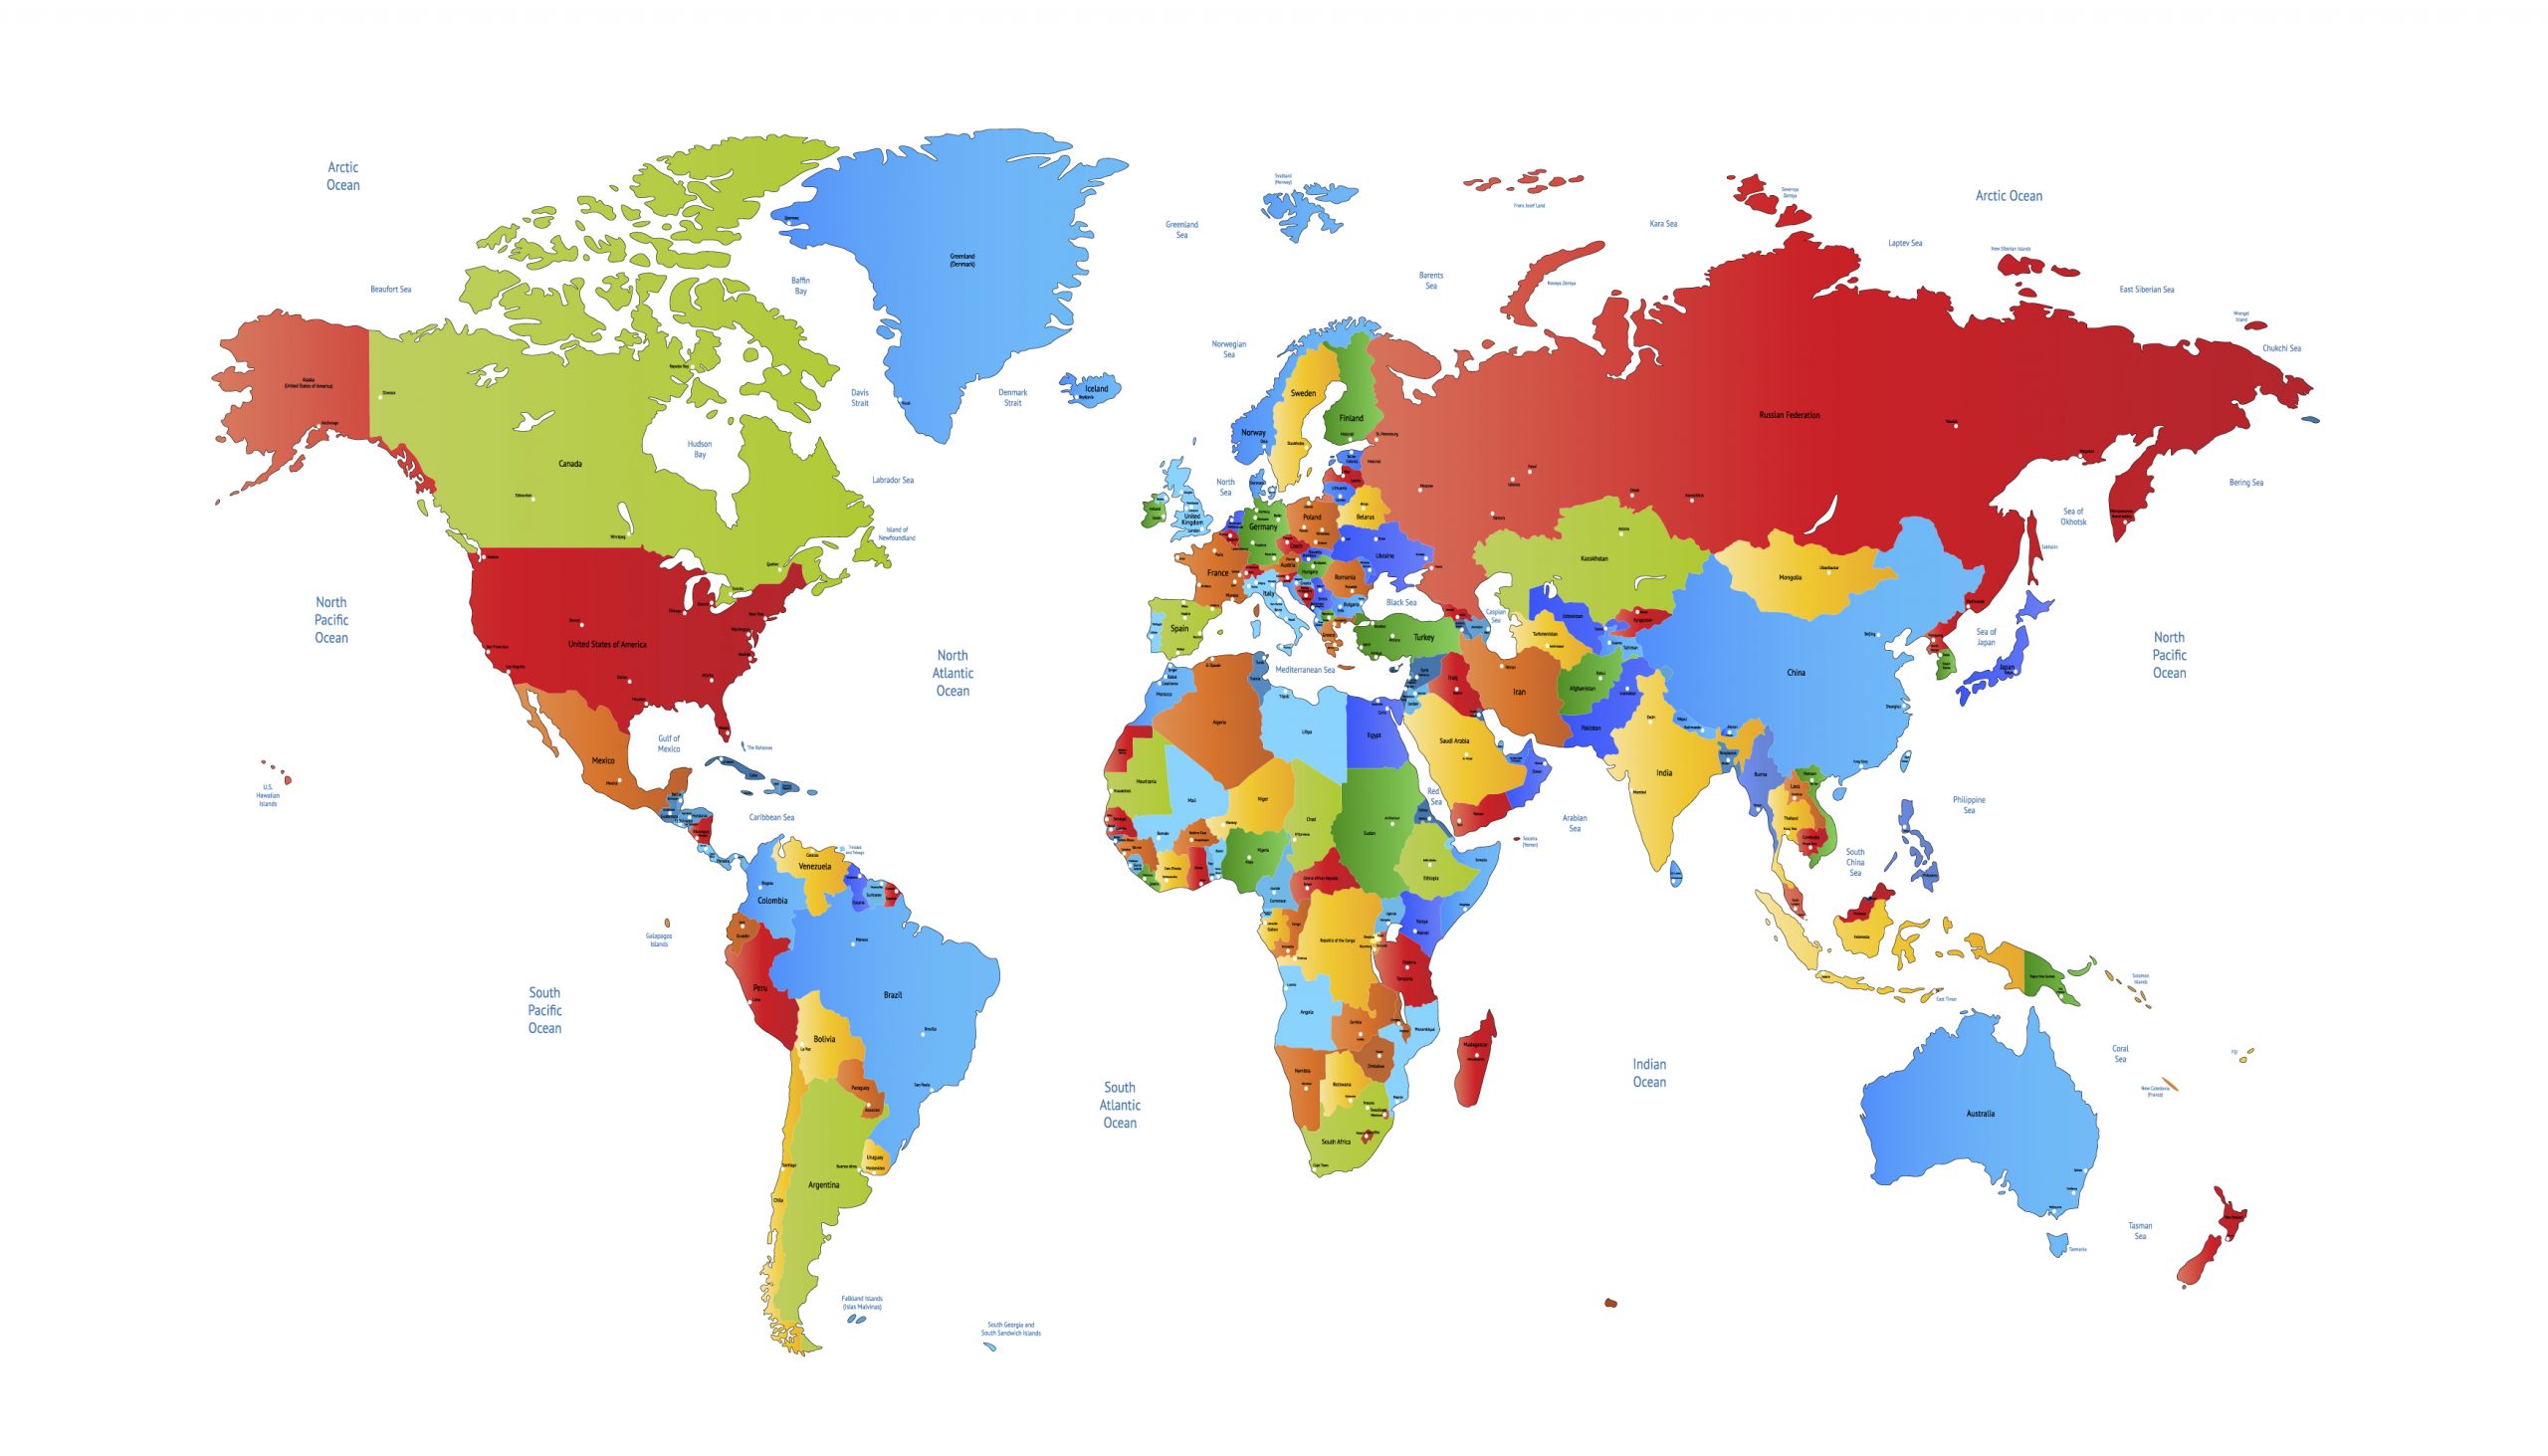 How Much Countries Are There In The World